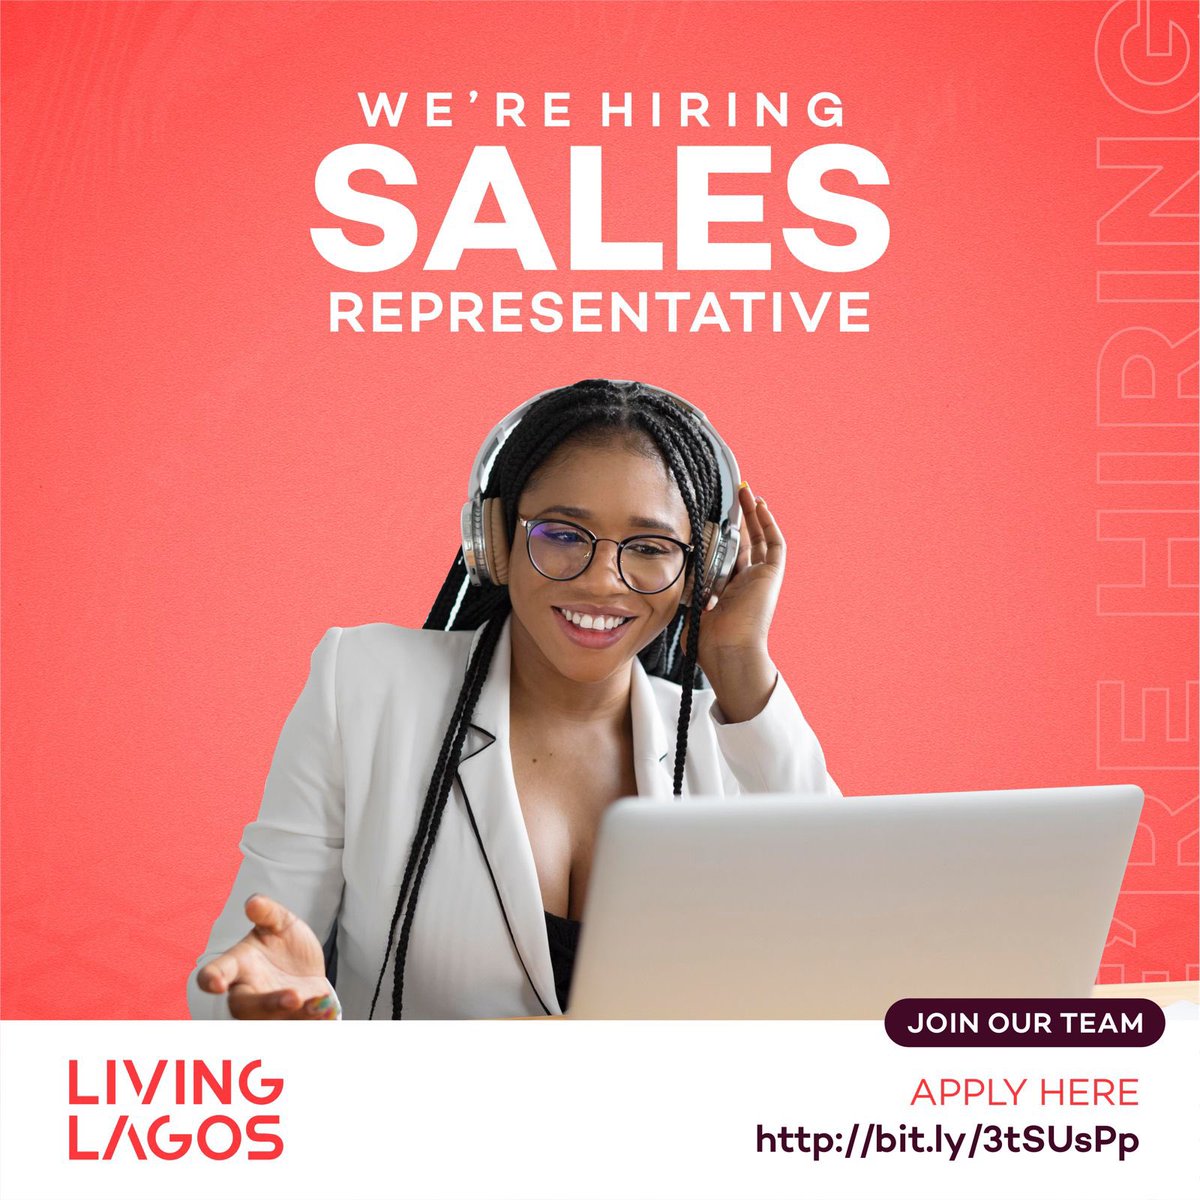 Are you a dynamic real estate enthusiast looking for a job? We do, however, have a position available.

Use the link in our bio to apply 

#NowHiring #RealEstateLagos #internposition #livinglagos #livinglagosng #job #explore #salesrepresentative